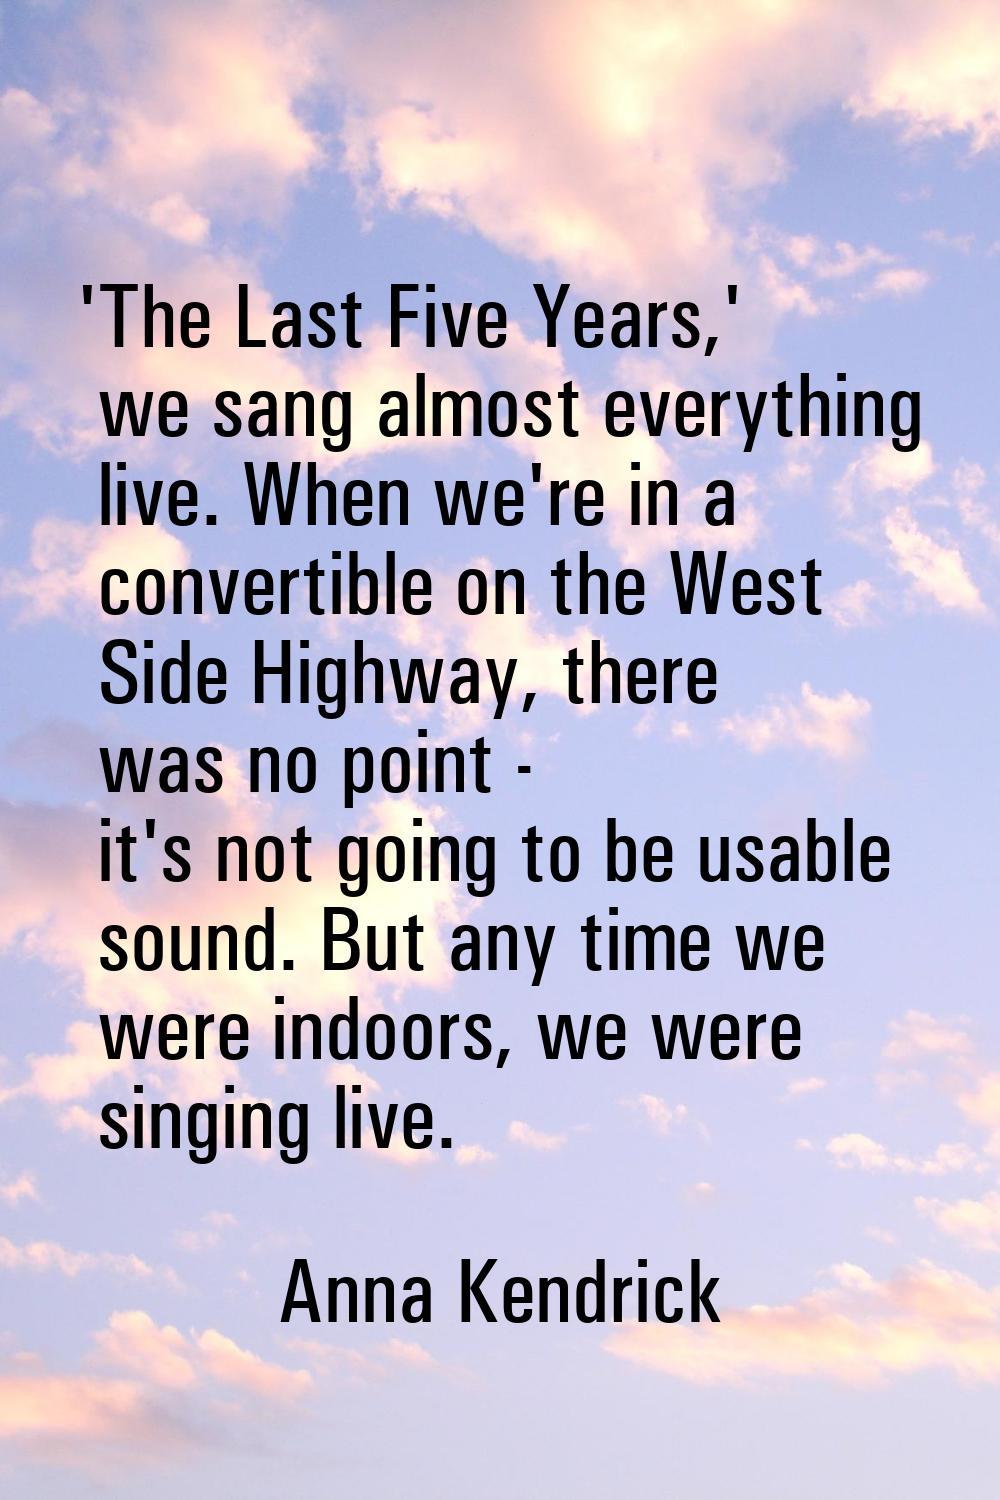 'The Last Five Years,' we sang almost everything live. When we're in a convertible on the West Side